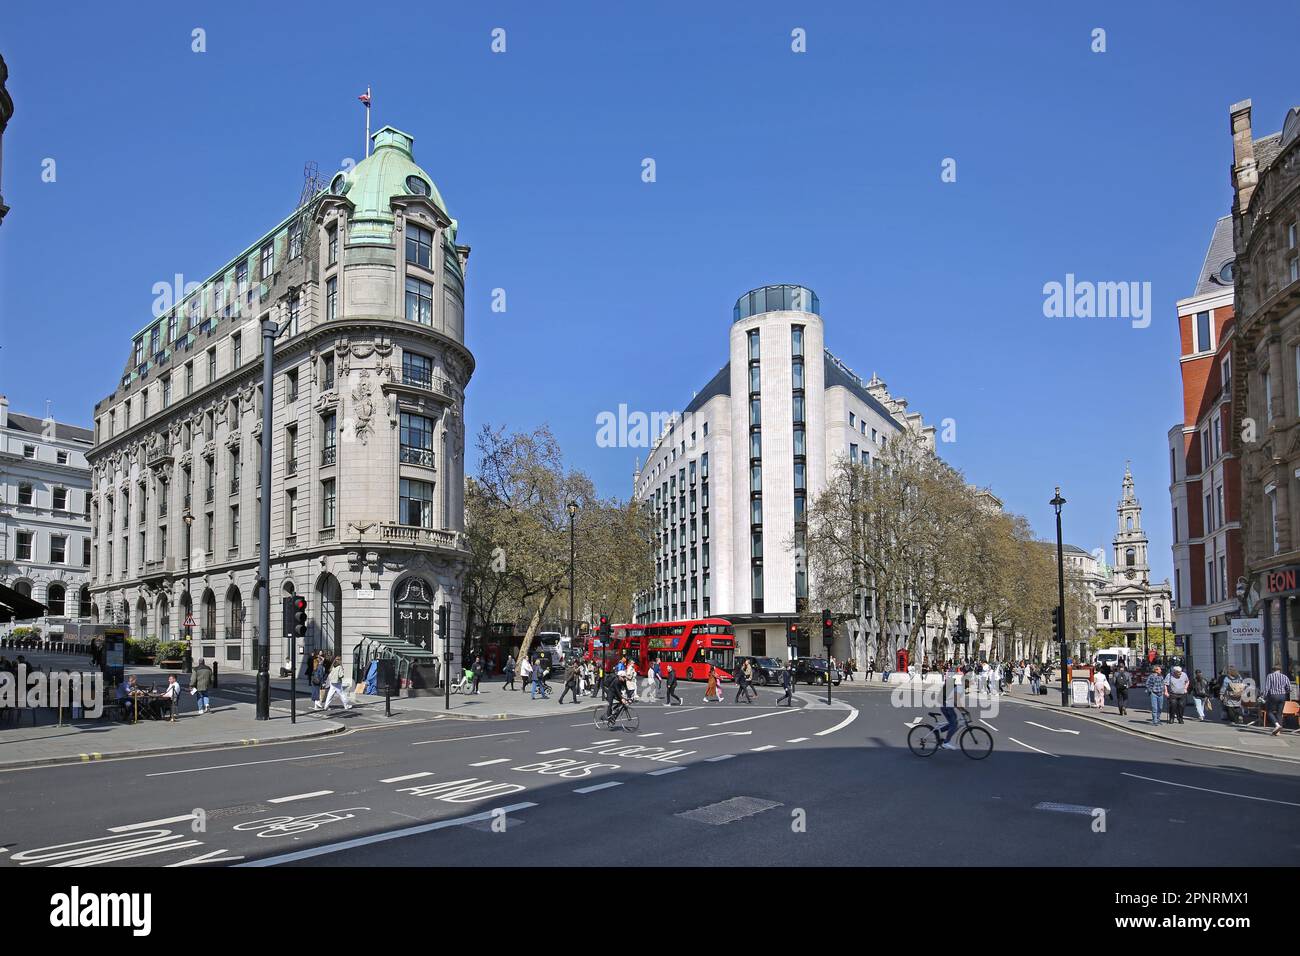 London, UK. Junction of Aldwych and the Strand looking east, showing the newly pedestrianised section of The Strand to the right. Stock Photo